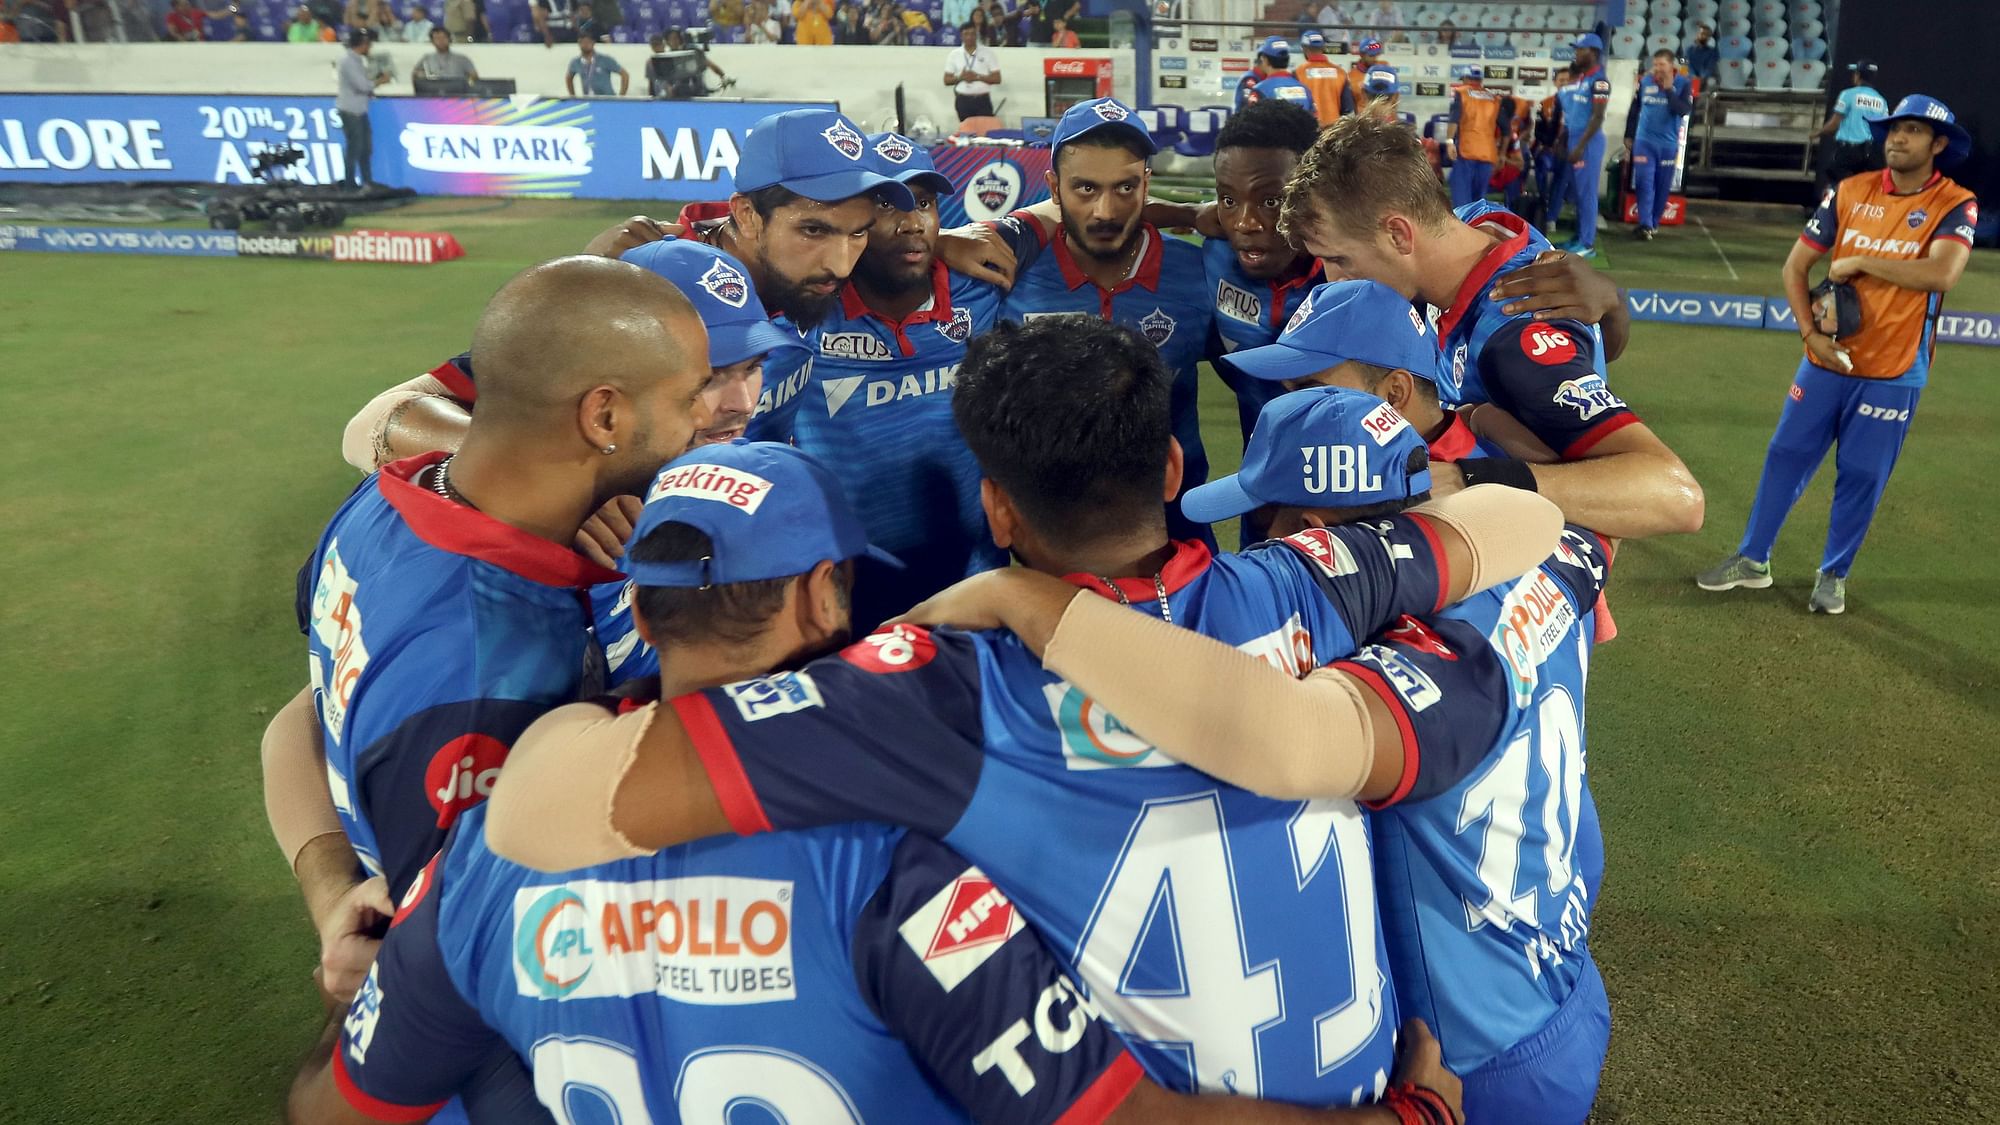 Delhi beat Hyderabad by 39 runs to move to second in the IPL standings.